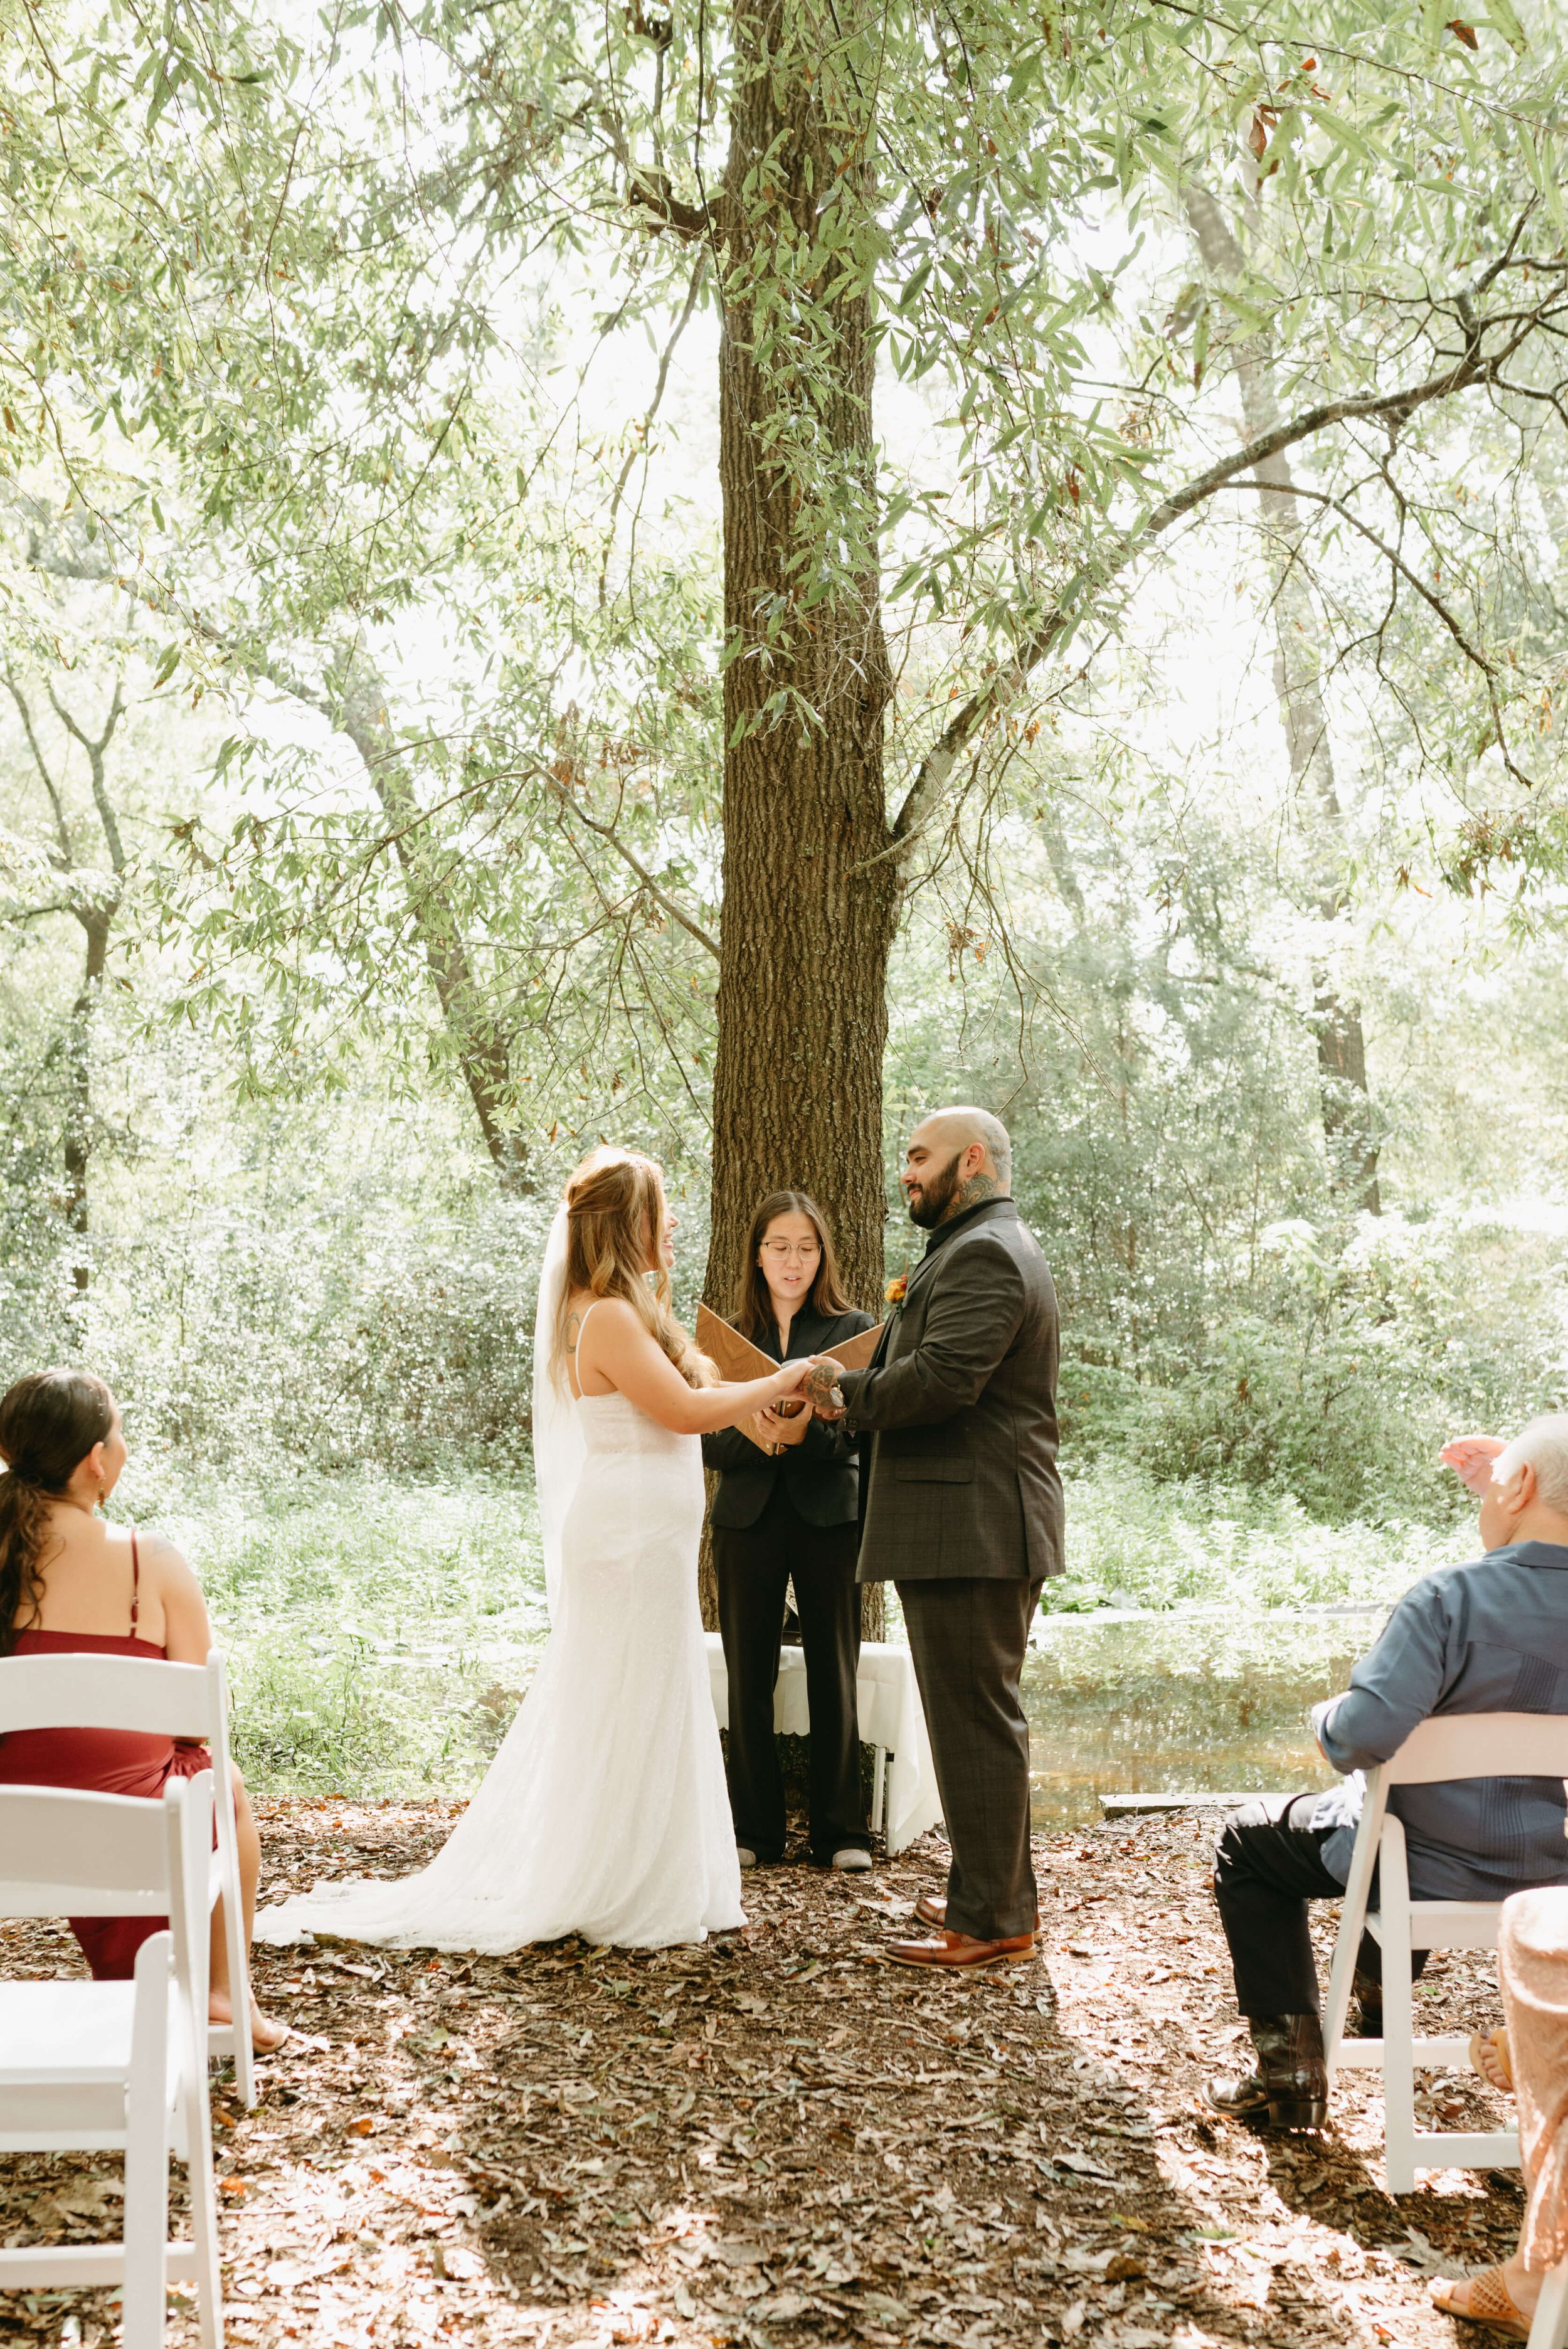 Intimate wedding photographed by Houston Elopement Photographer, J. Andrade Visual Arts